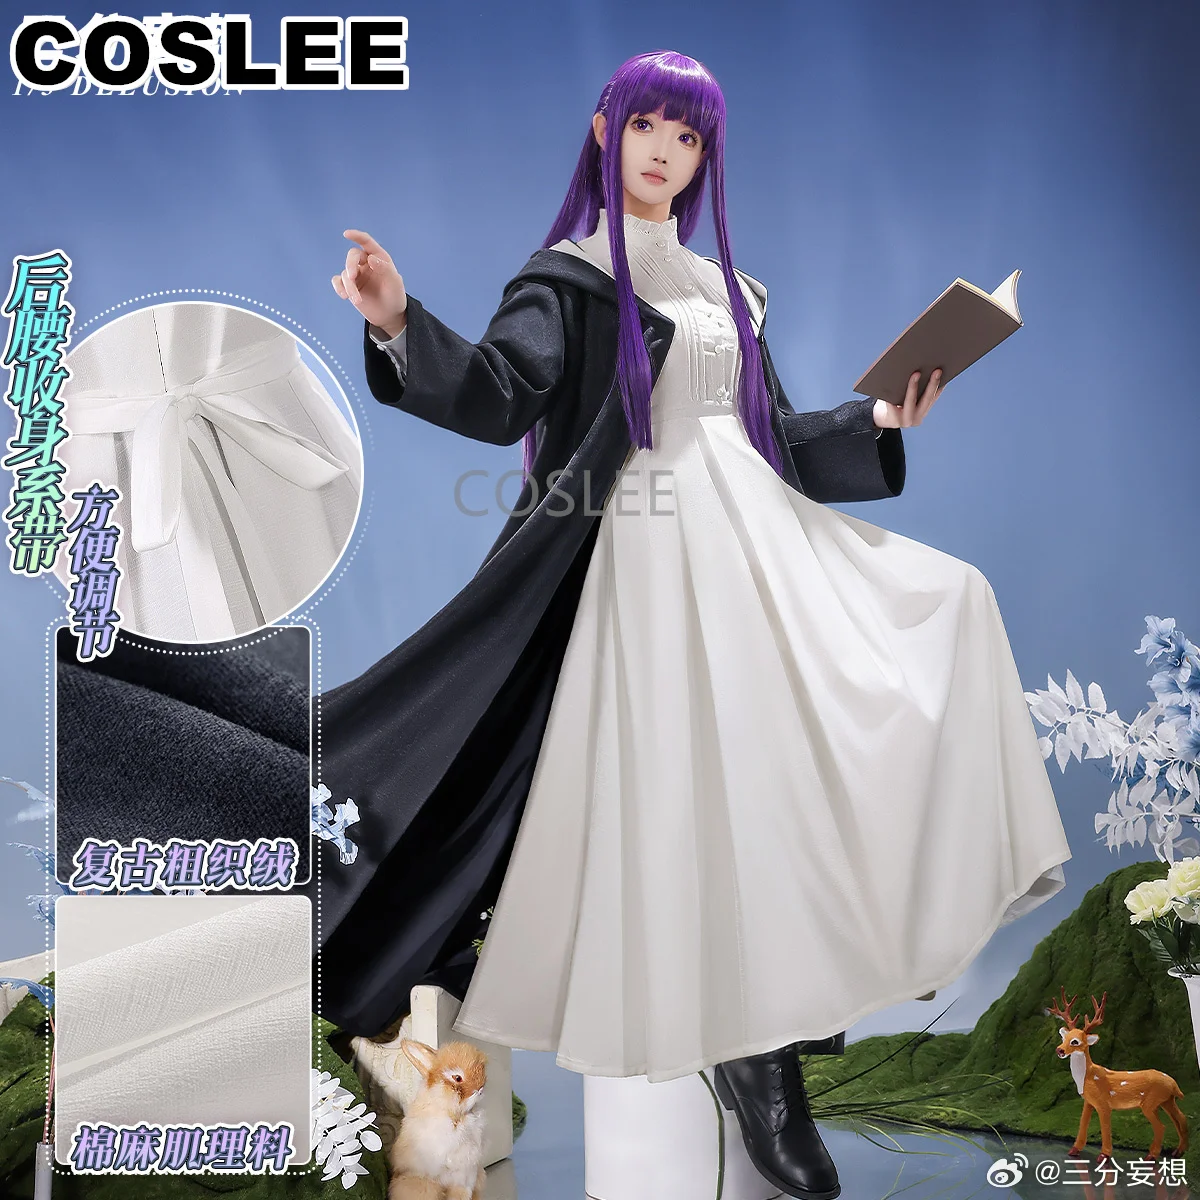 

COSLEE Anime Frieren At The Funeral Fern Cosplay Costume Magician Women Dress Uniform Role Play Halloween Party Outfit For Women